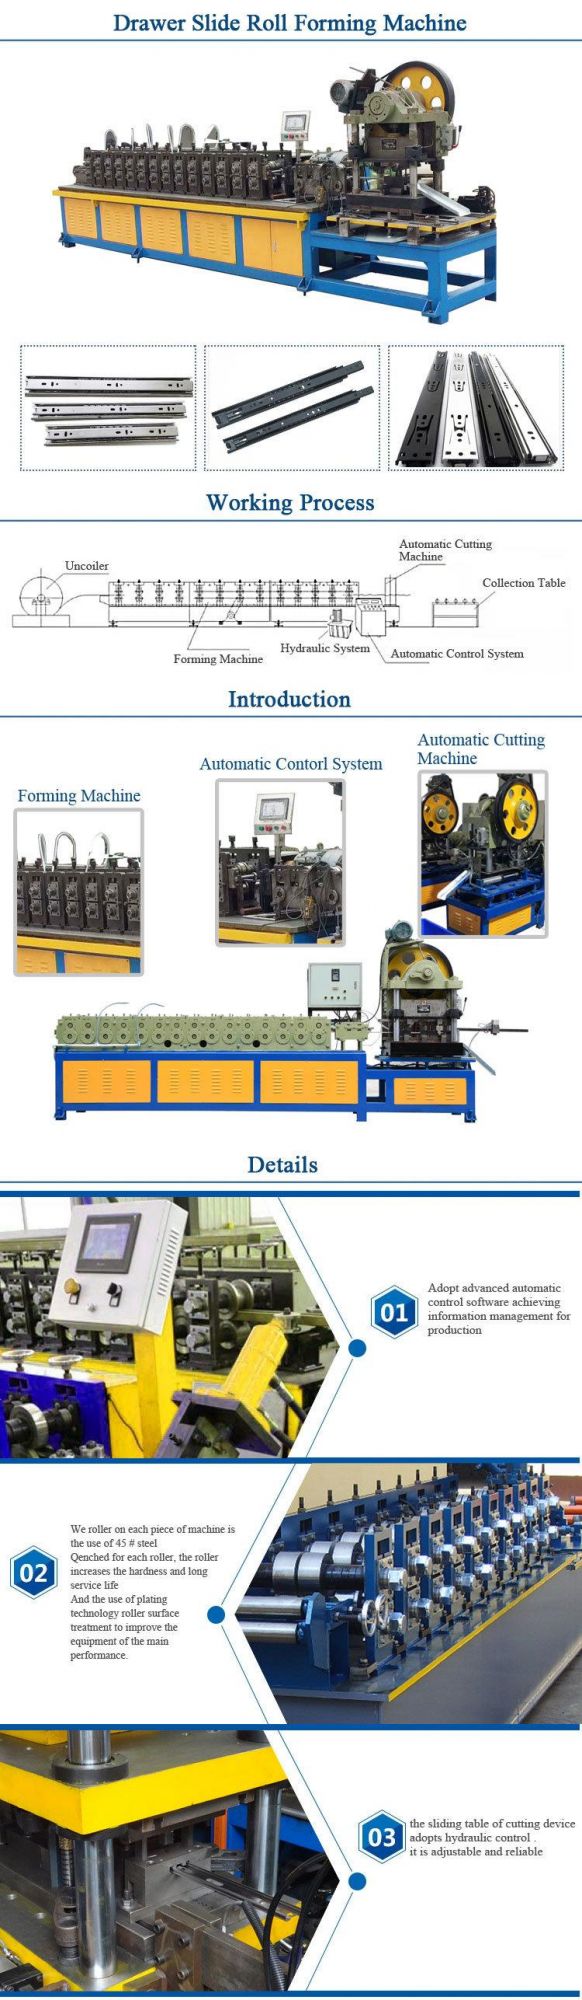 Customized The Latest Technology Drawer Slide Channel Production Line